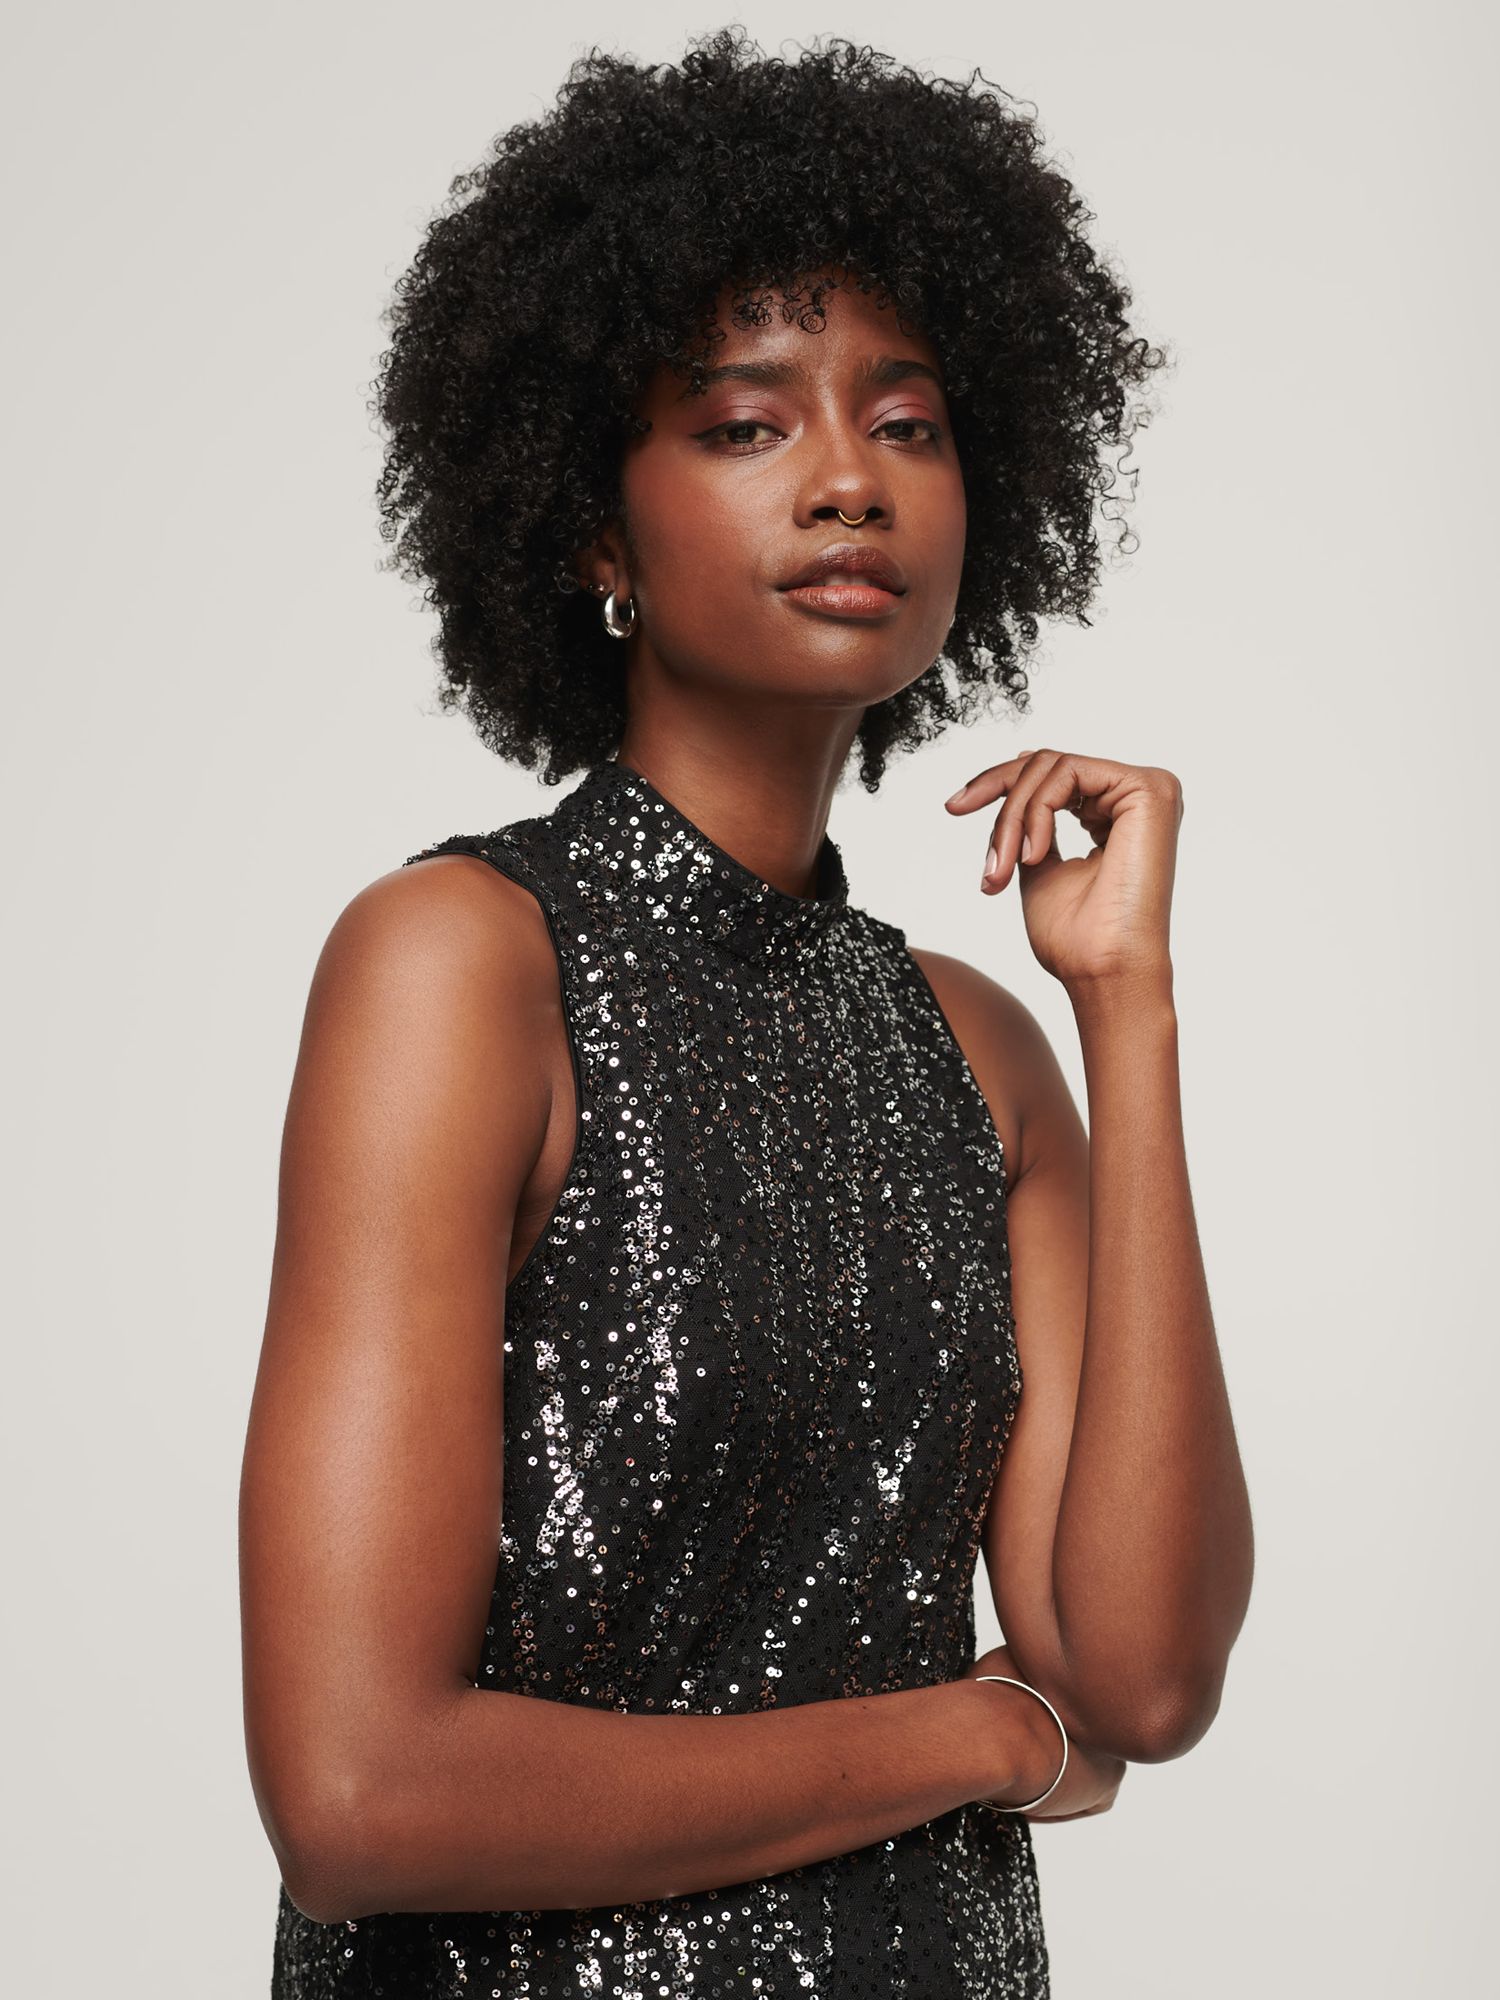 Buy Superdry Sleeveless Sequin A Line Mini Dress Online at johnlewis.com